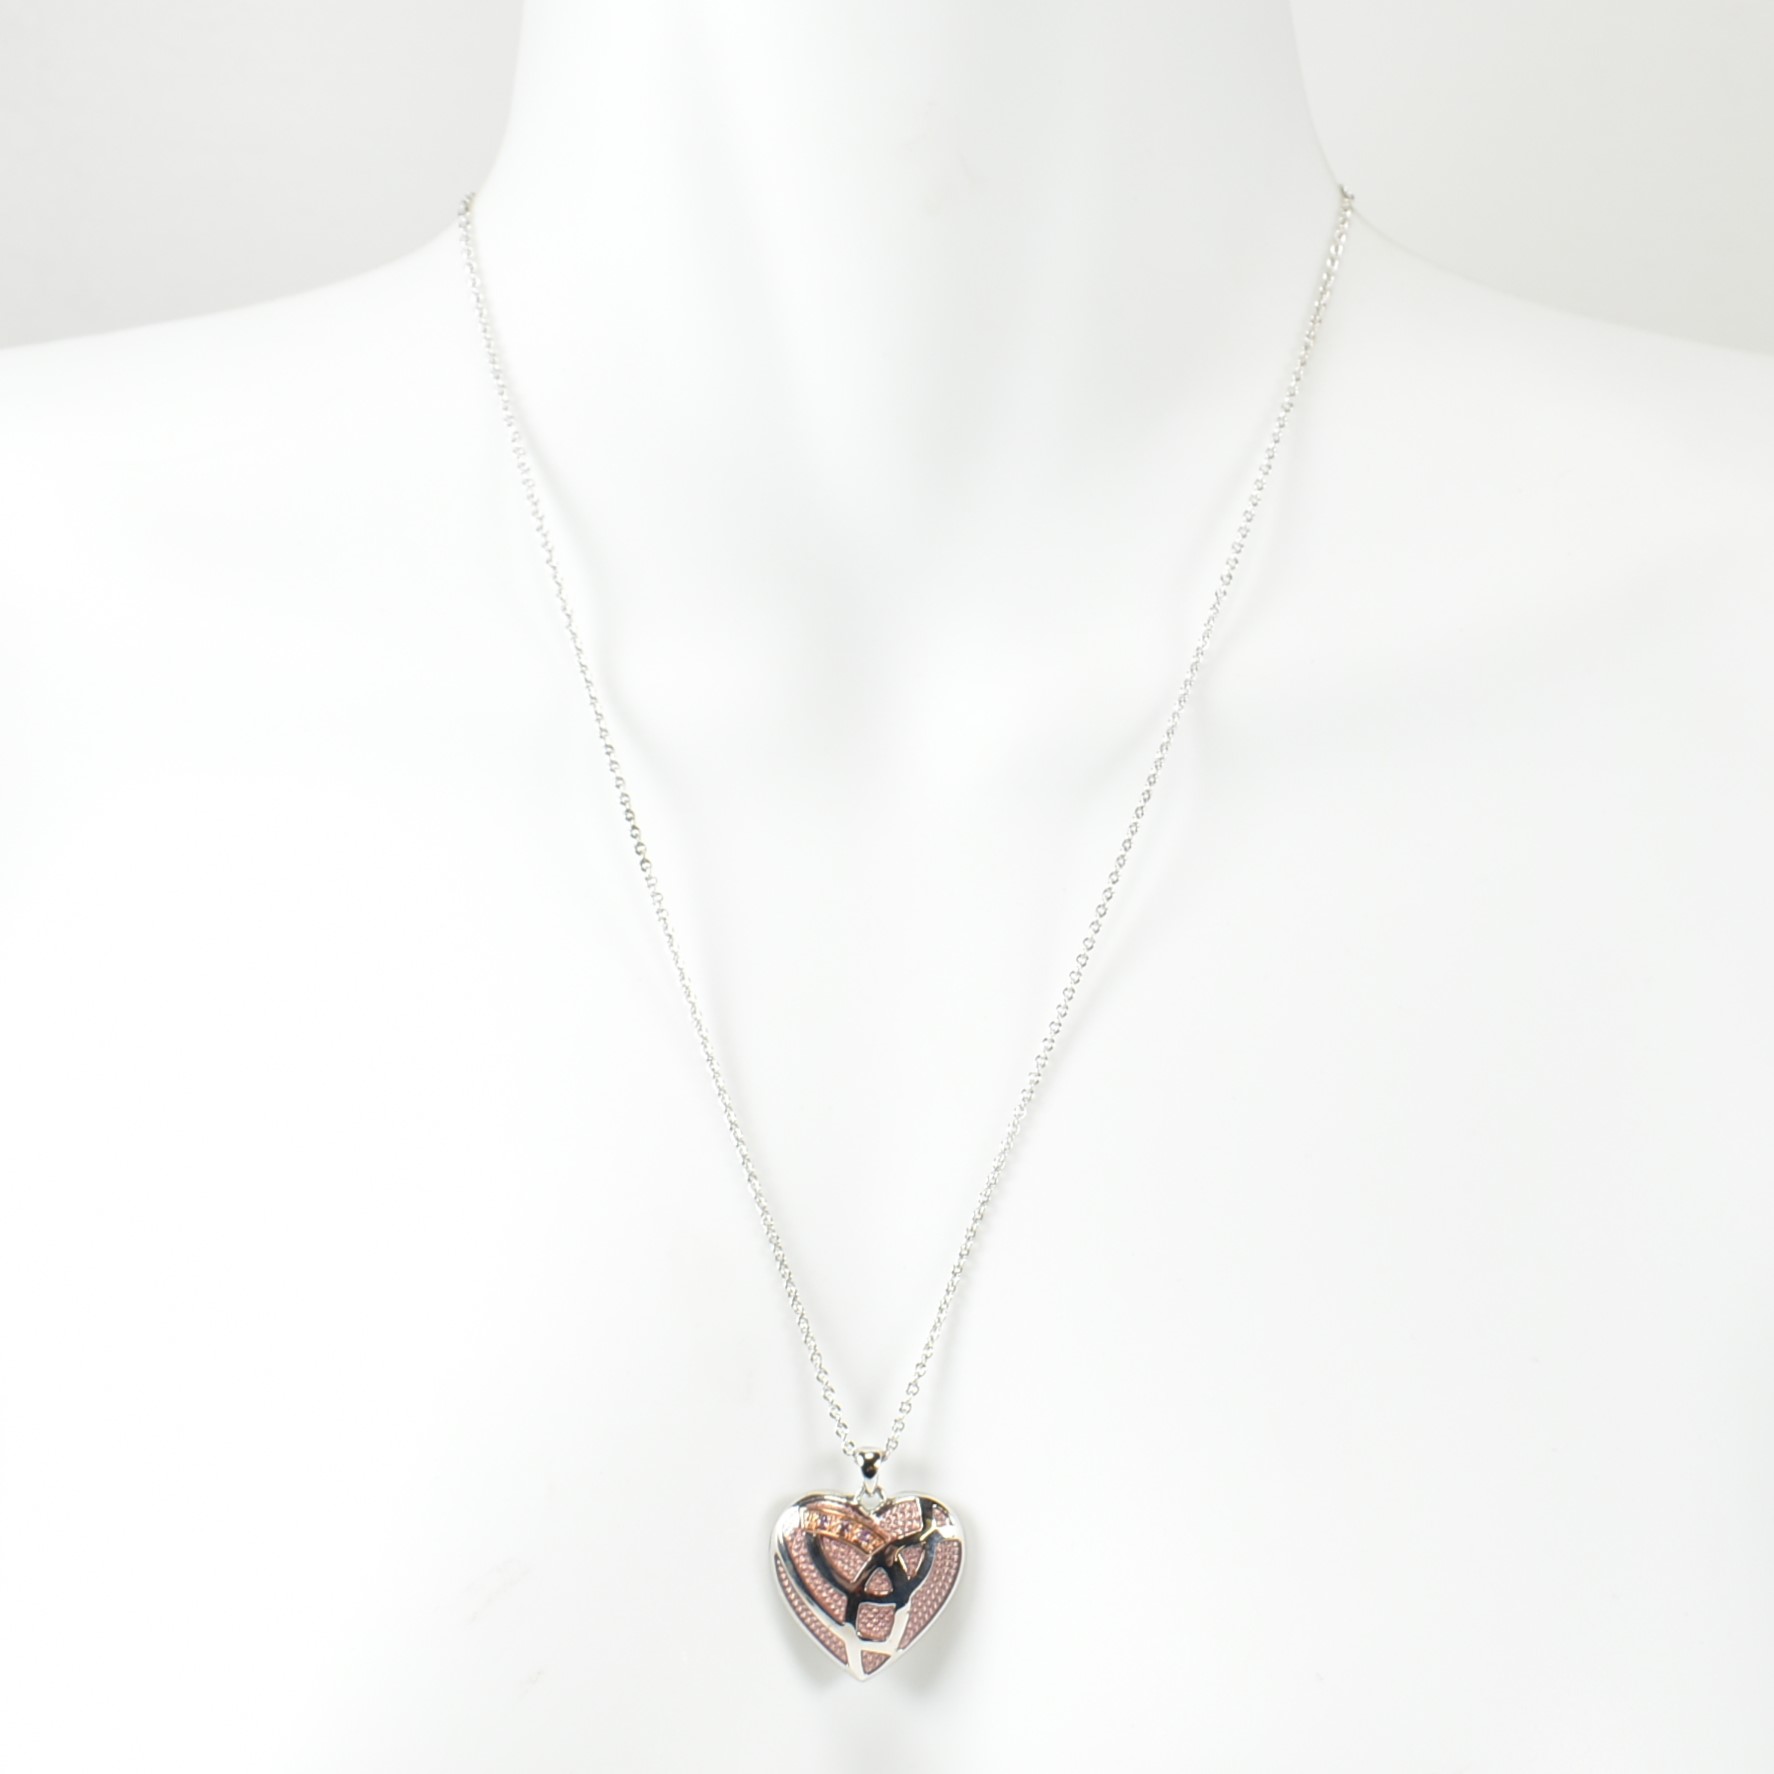 HALLMARKED SILVER CLOGAU CELTIC HEART PENDANT NECKLACE - Image 6 of 6